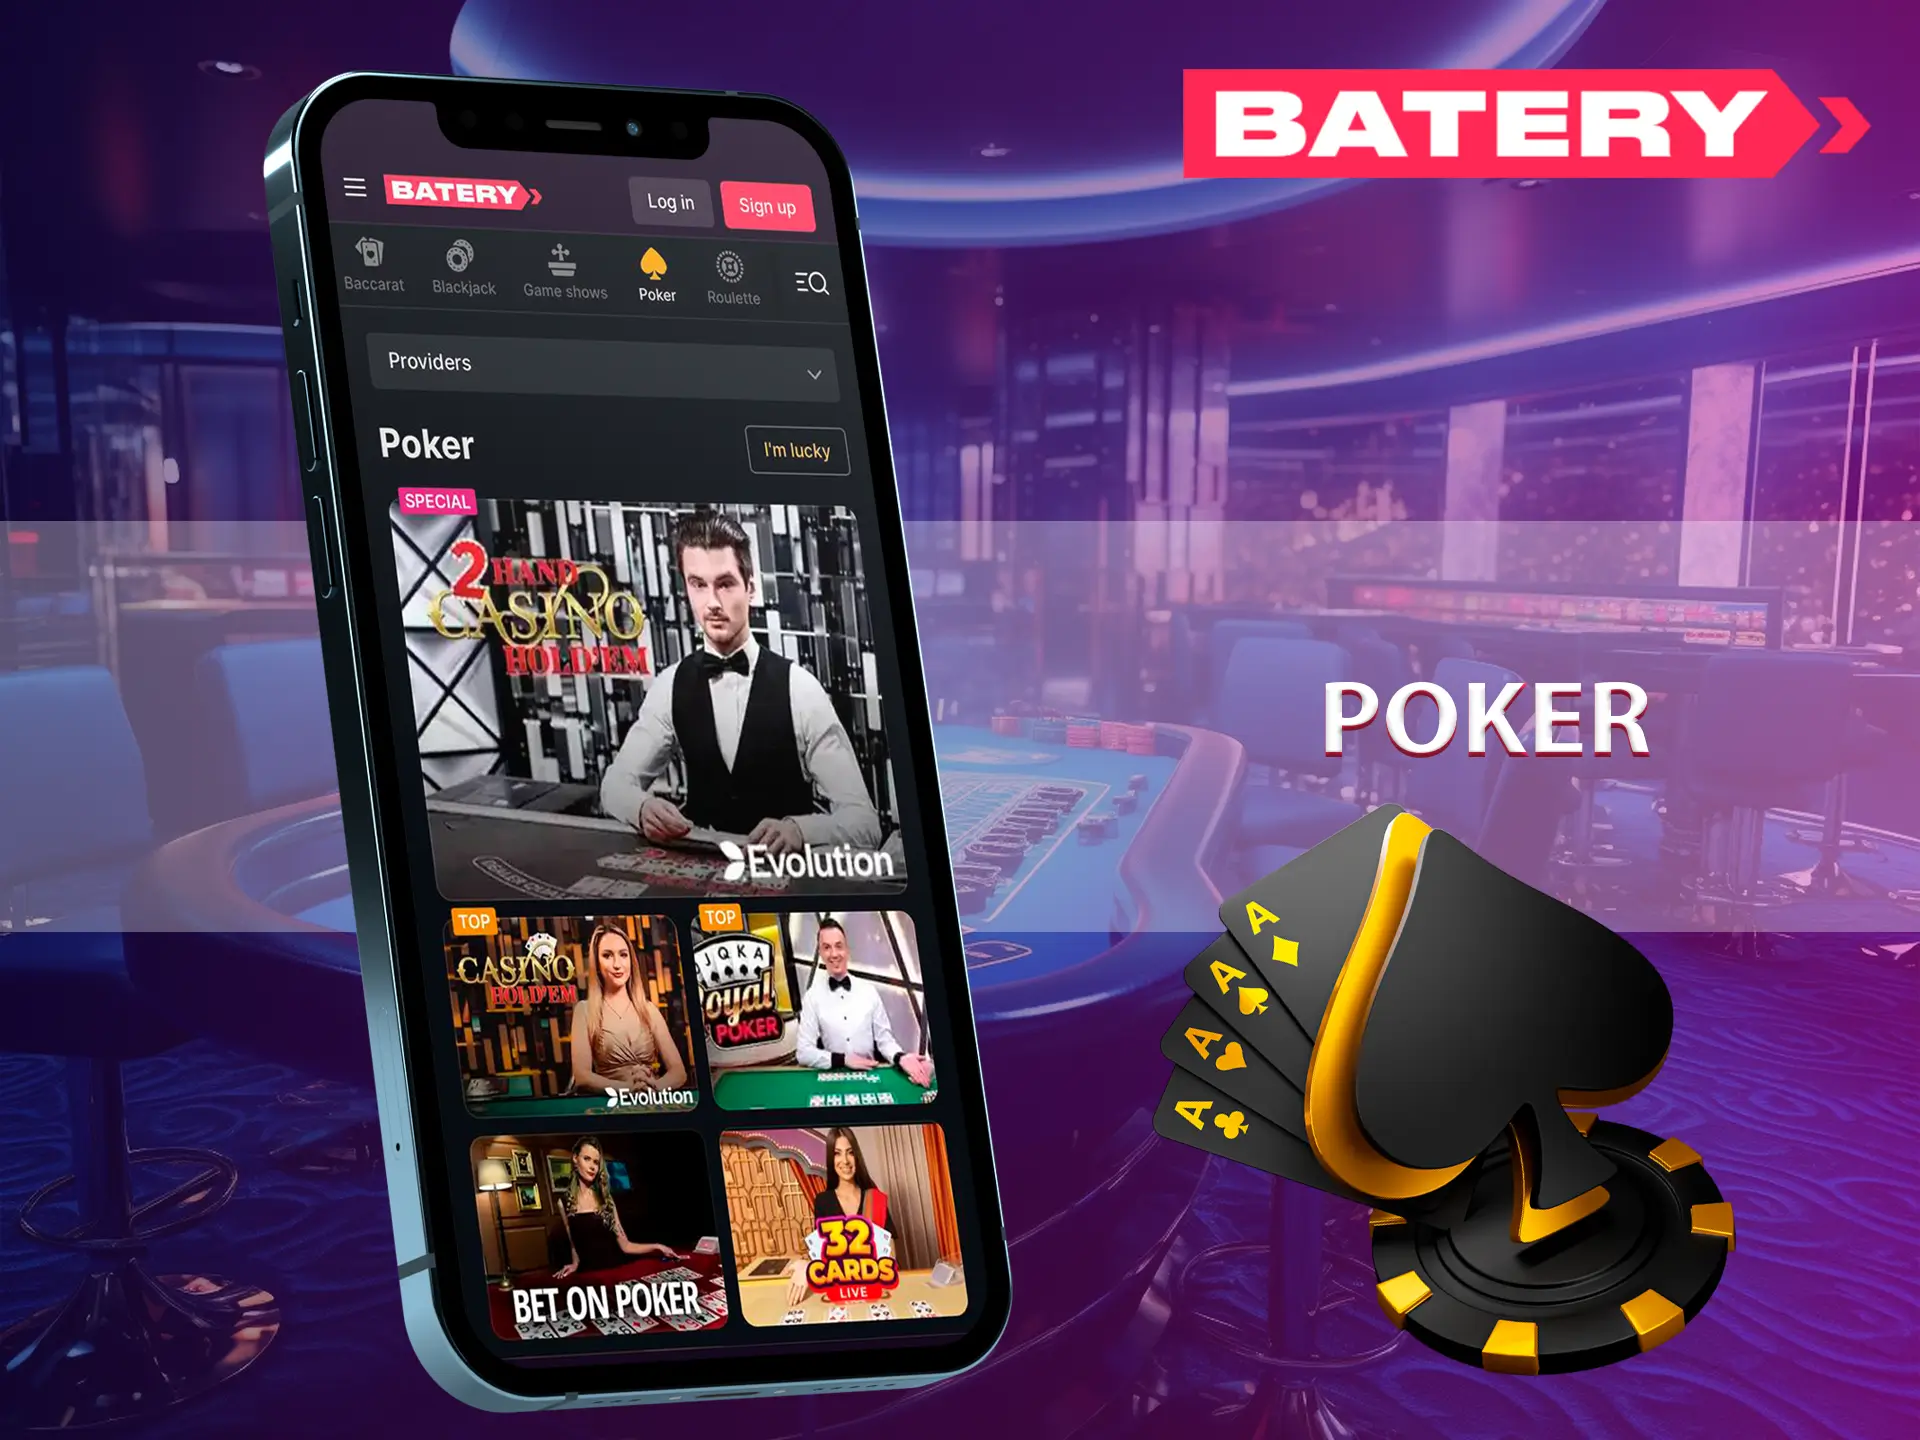 Put together the best combination in poker from Batery.